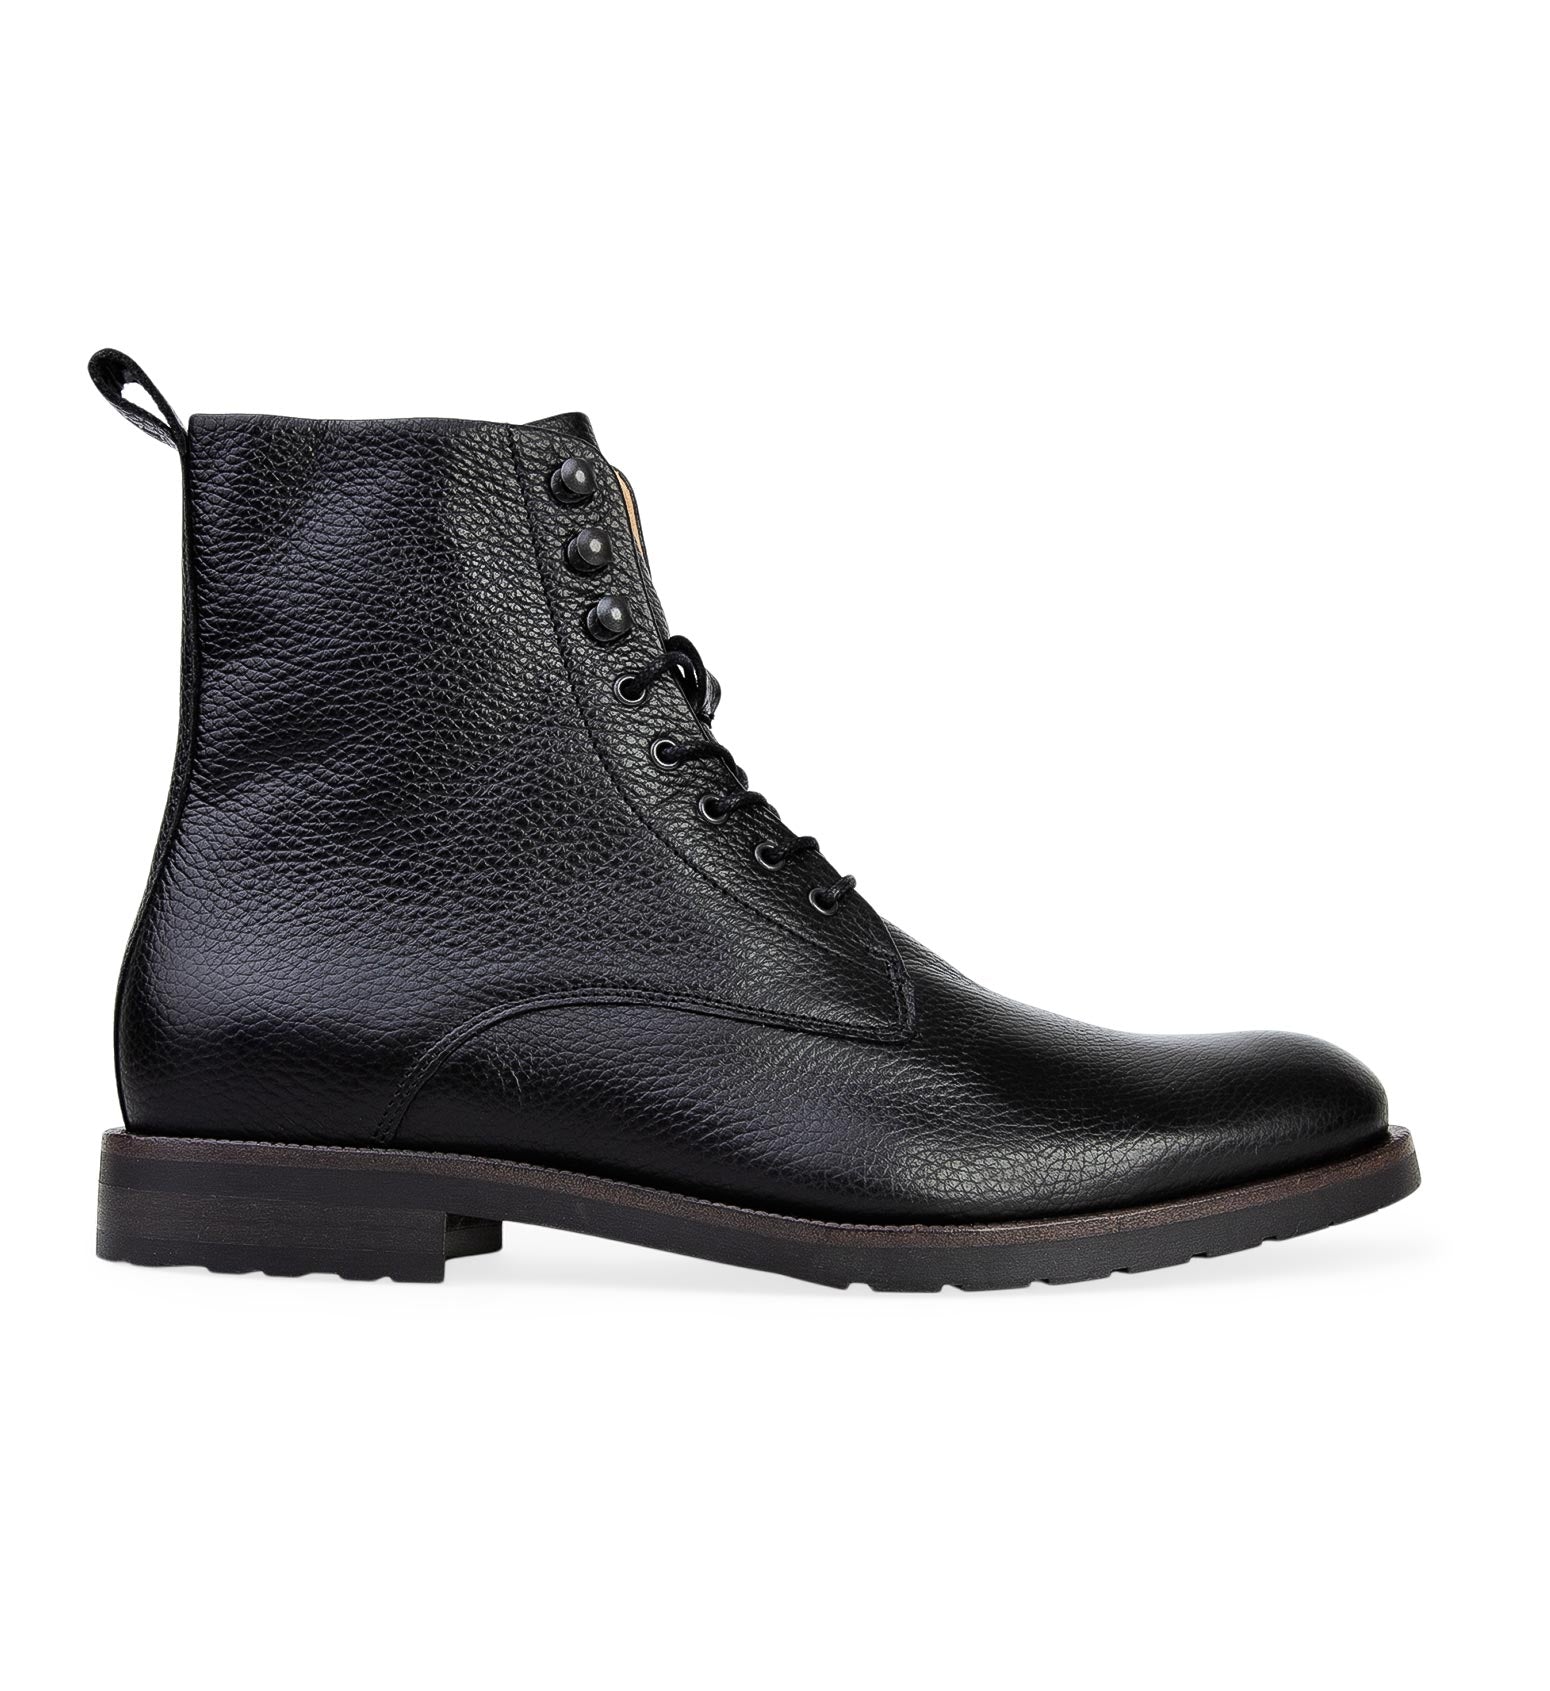 Argon Black Pebbled Leather Boots | Bared Footwear